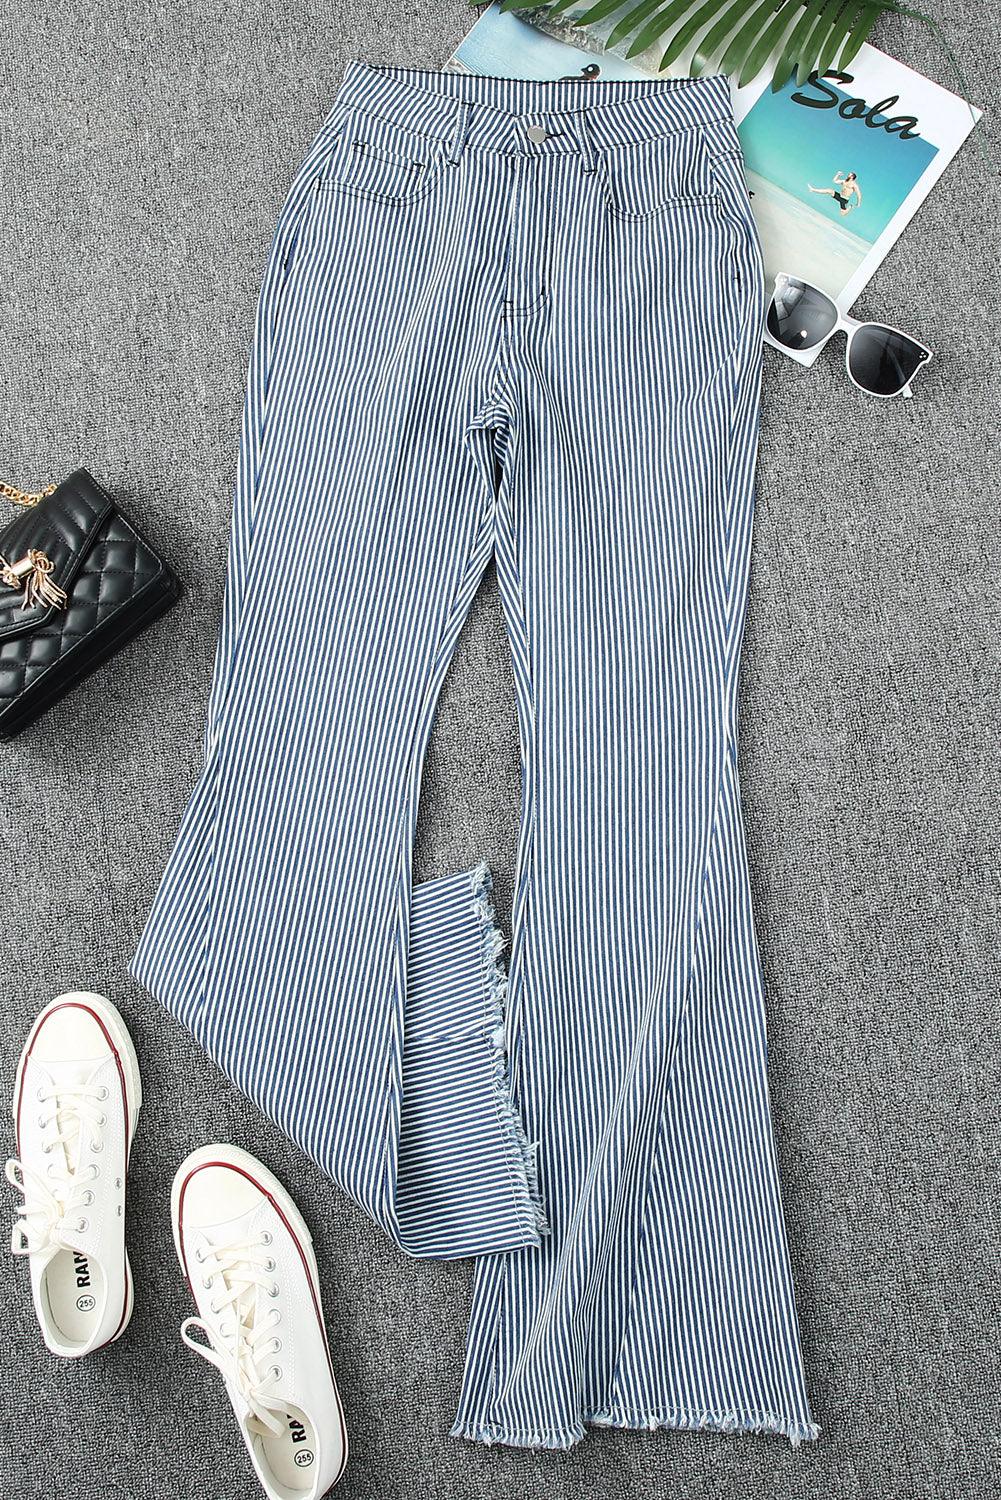 Striped High-Waisted Bell Bottom Denim Pants with Pockets Blue